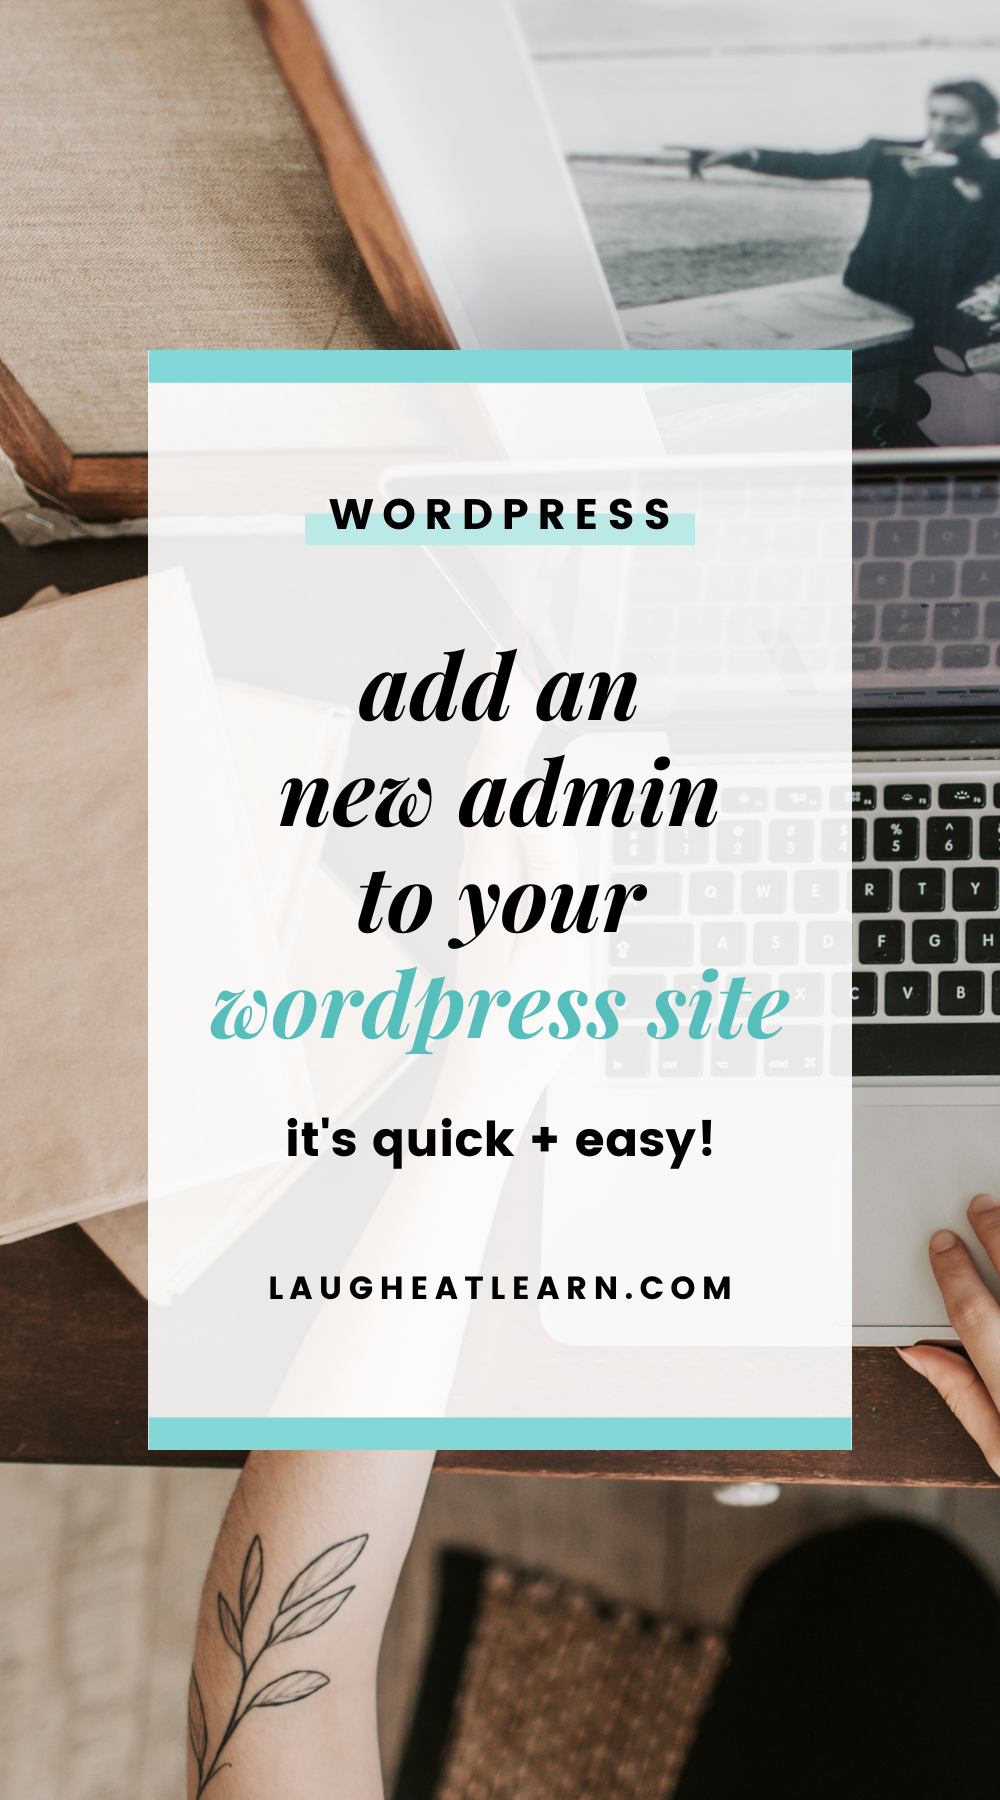 Sometimes you'll need to add a admin to your WordPress so they can gain access and do needed tasks for you. Great news - it's easy peasy and only takes a few minutes to complete.